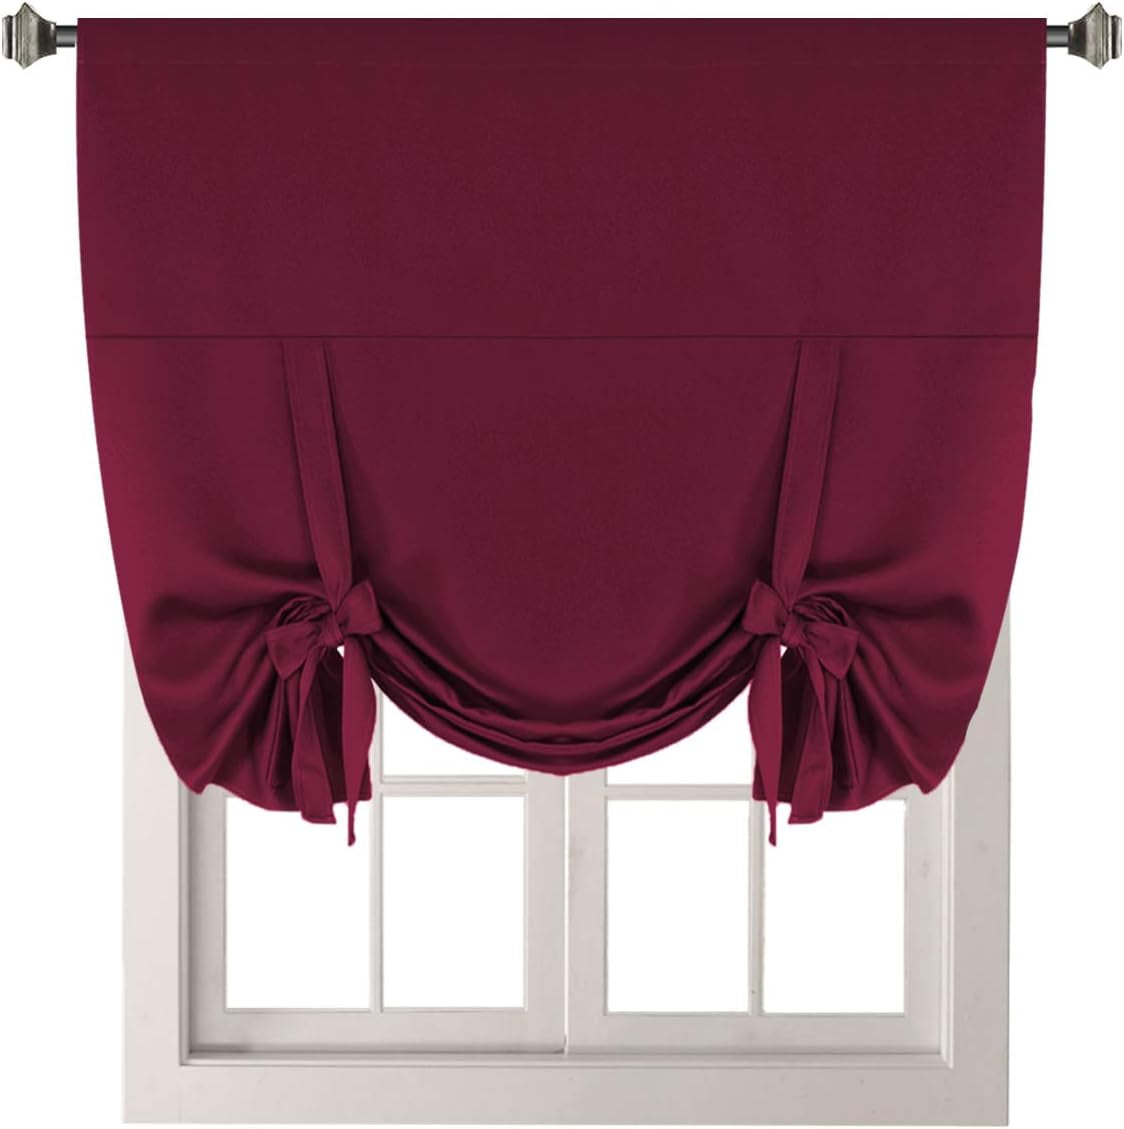 H.VERSAILTEX Tie up Curtain Thermal Insulated Room Darkening Rod Pocket Valance for Bedroom (Coral, 1 Panel, 42 Inches W X 63 Inches L)  H.VERSAILTEX Burgundy W42" X L63" 1-Pack 